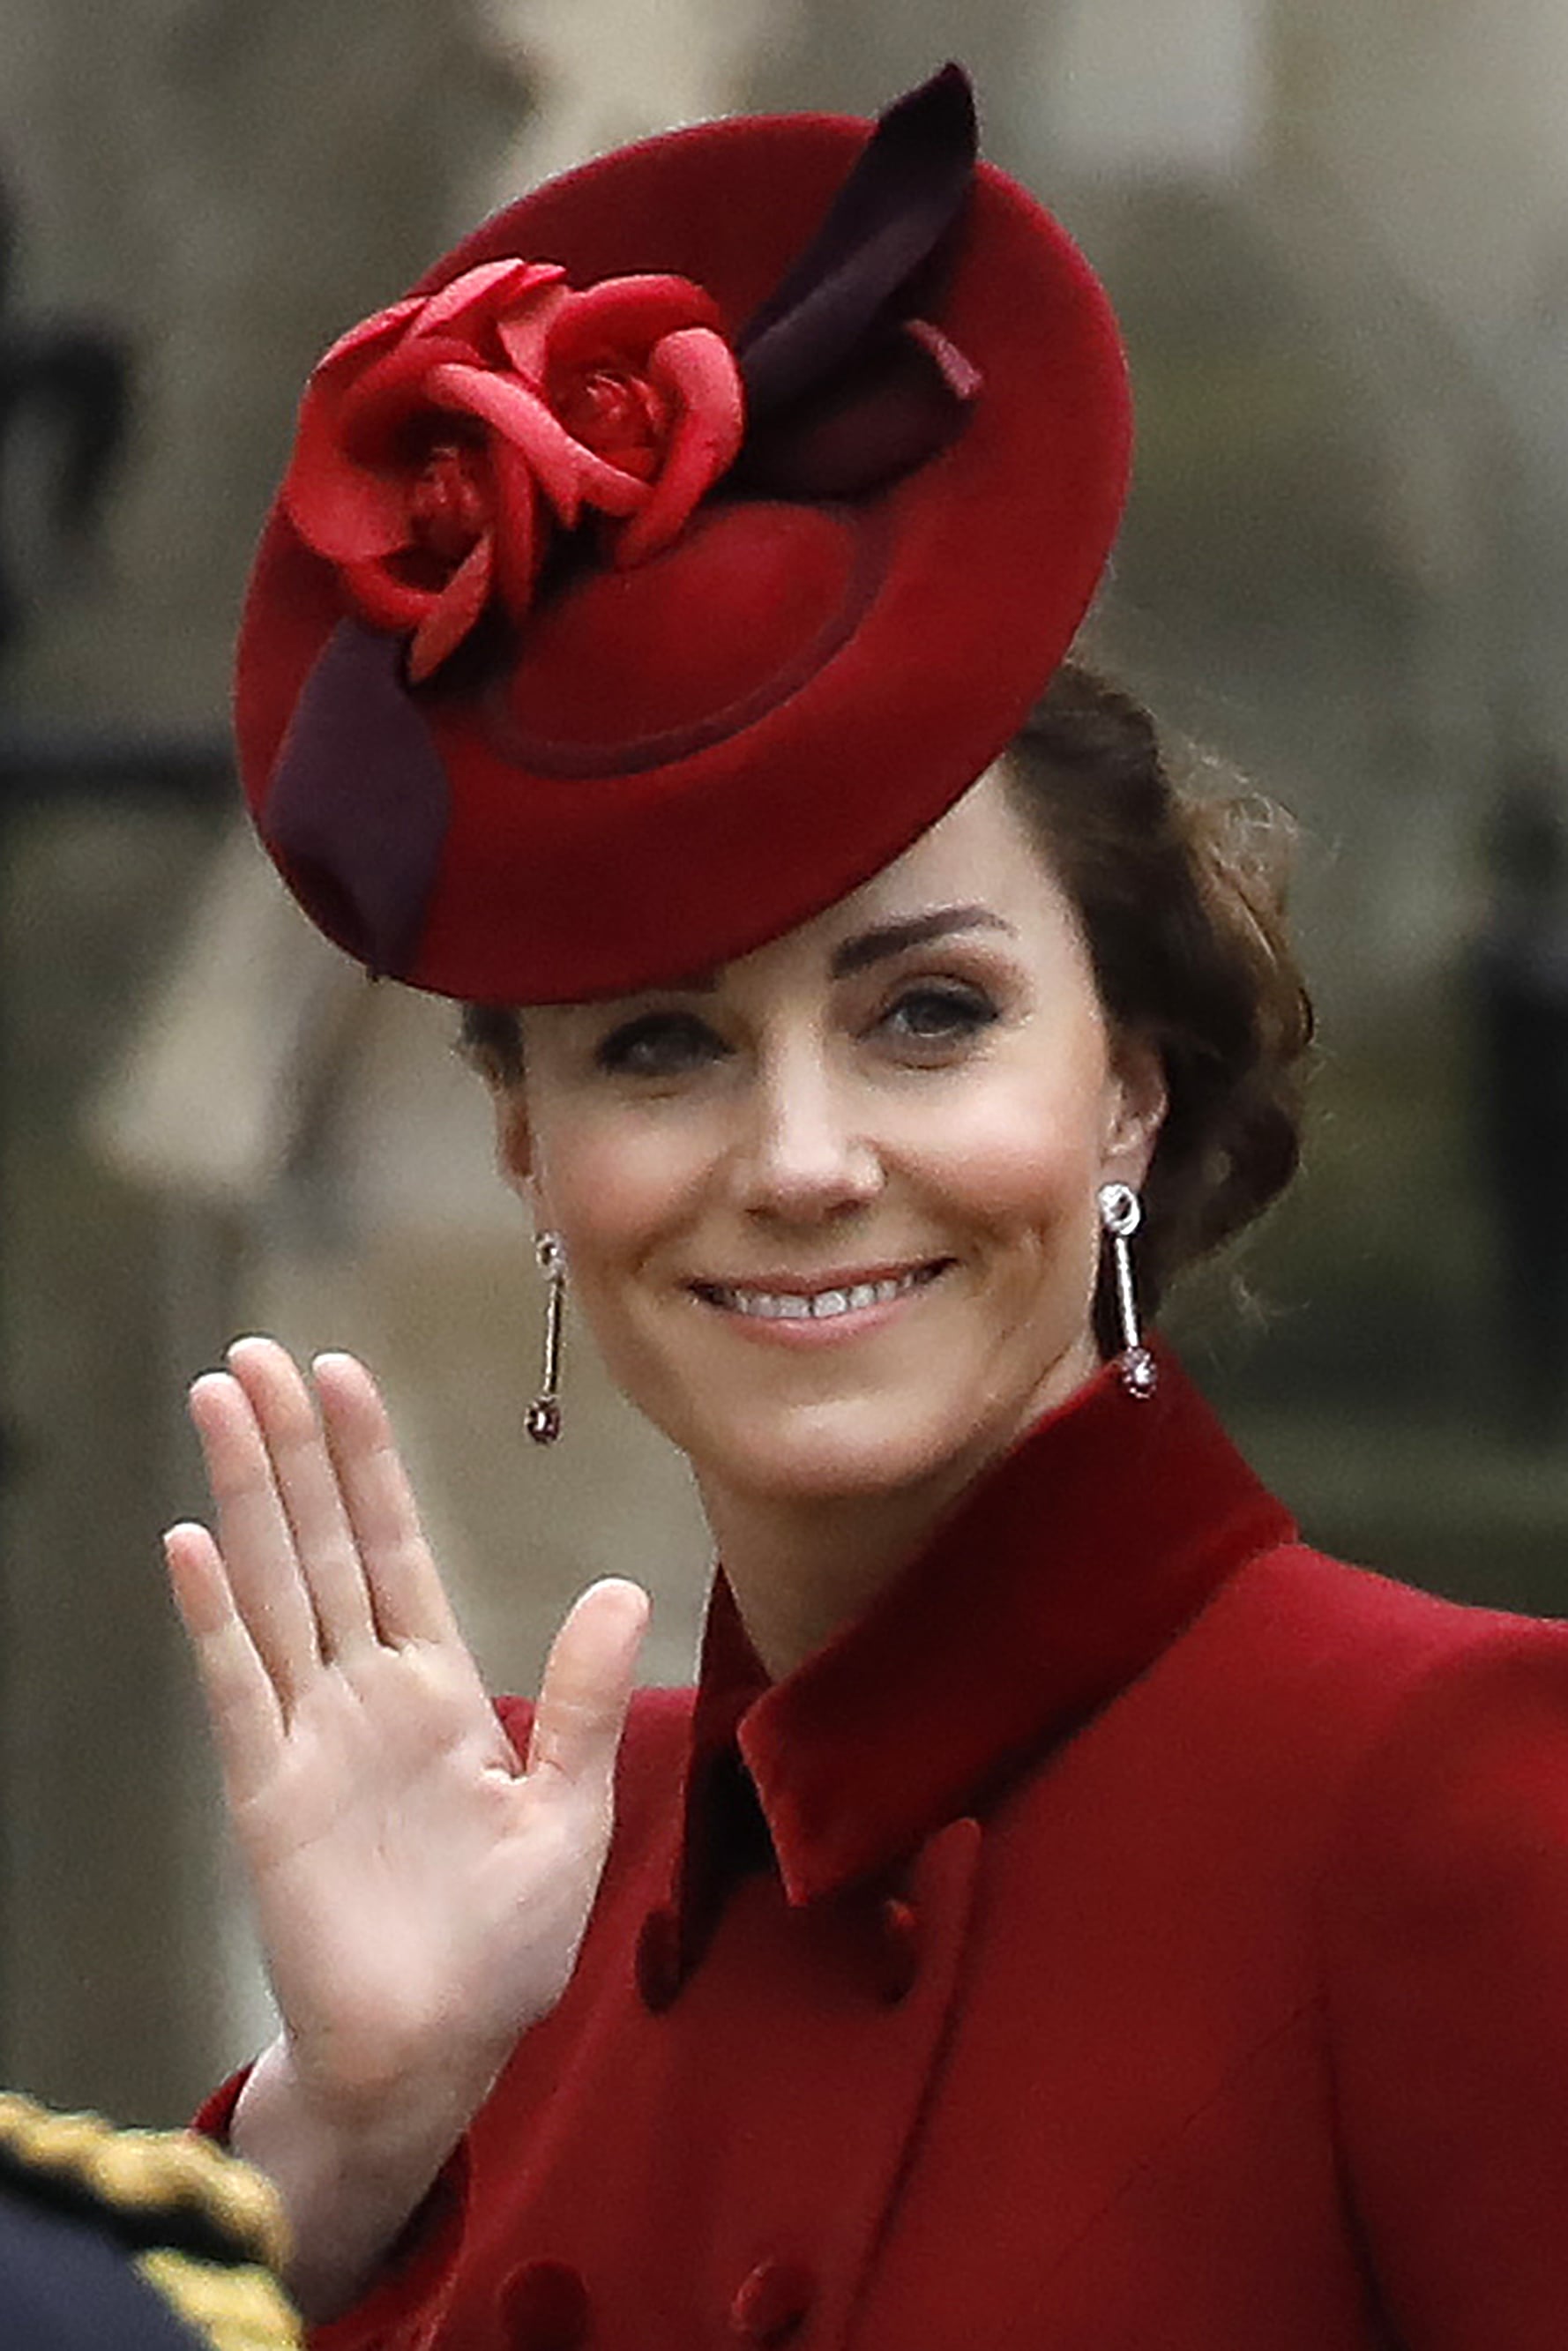 The Duchess of Cambridge's Red Outfit at Commonwealth Day